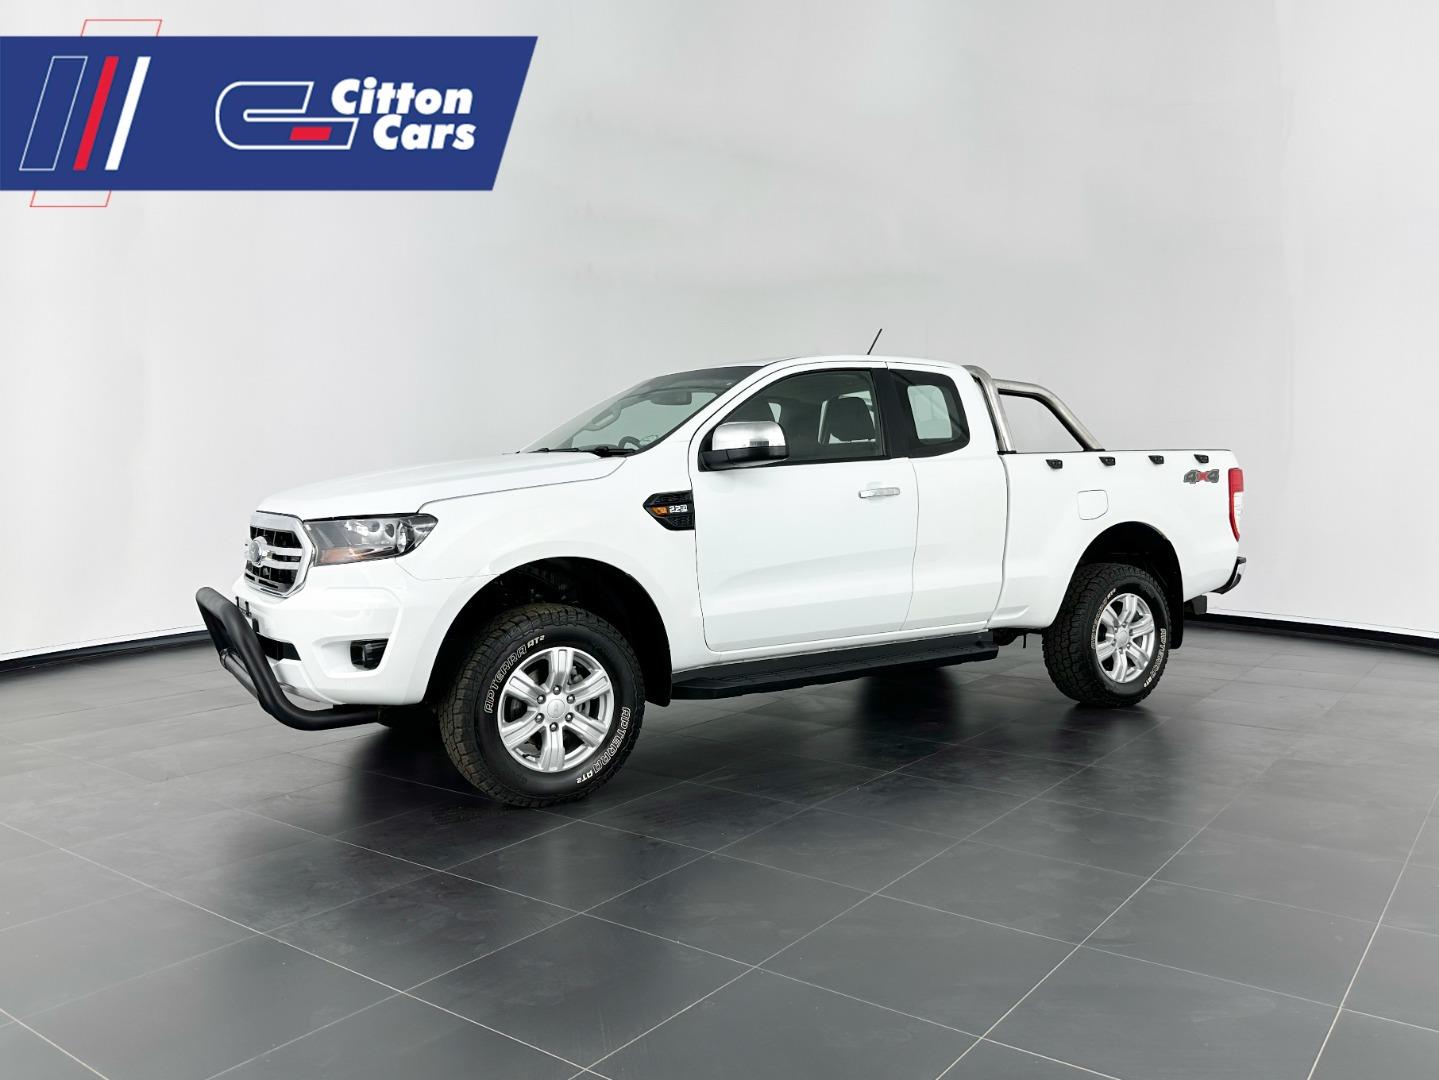 Ford Ranger 2.2TDCi SuperCab 4×4 XLS Auto for Sale